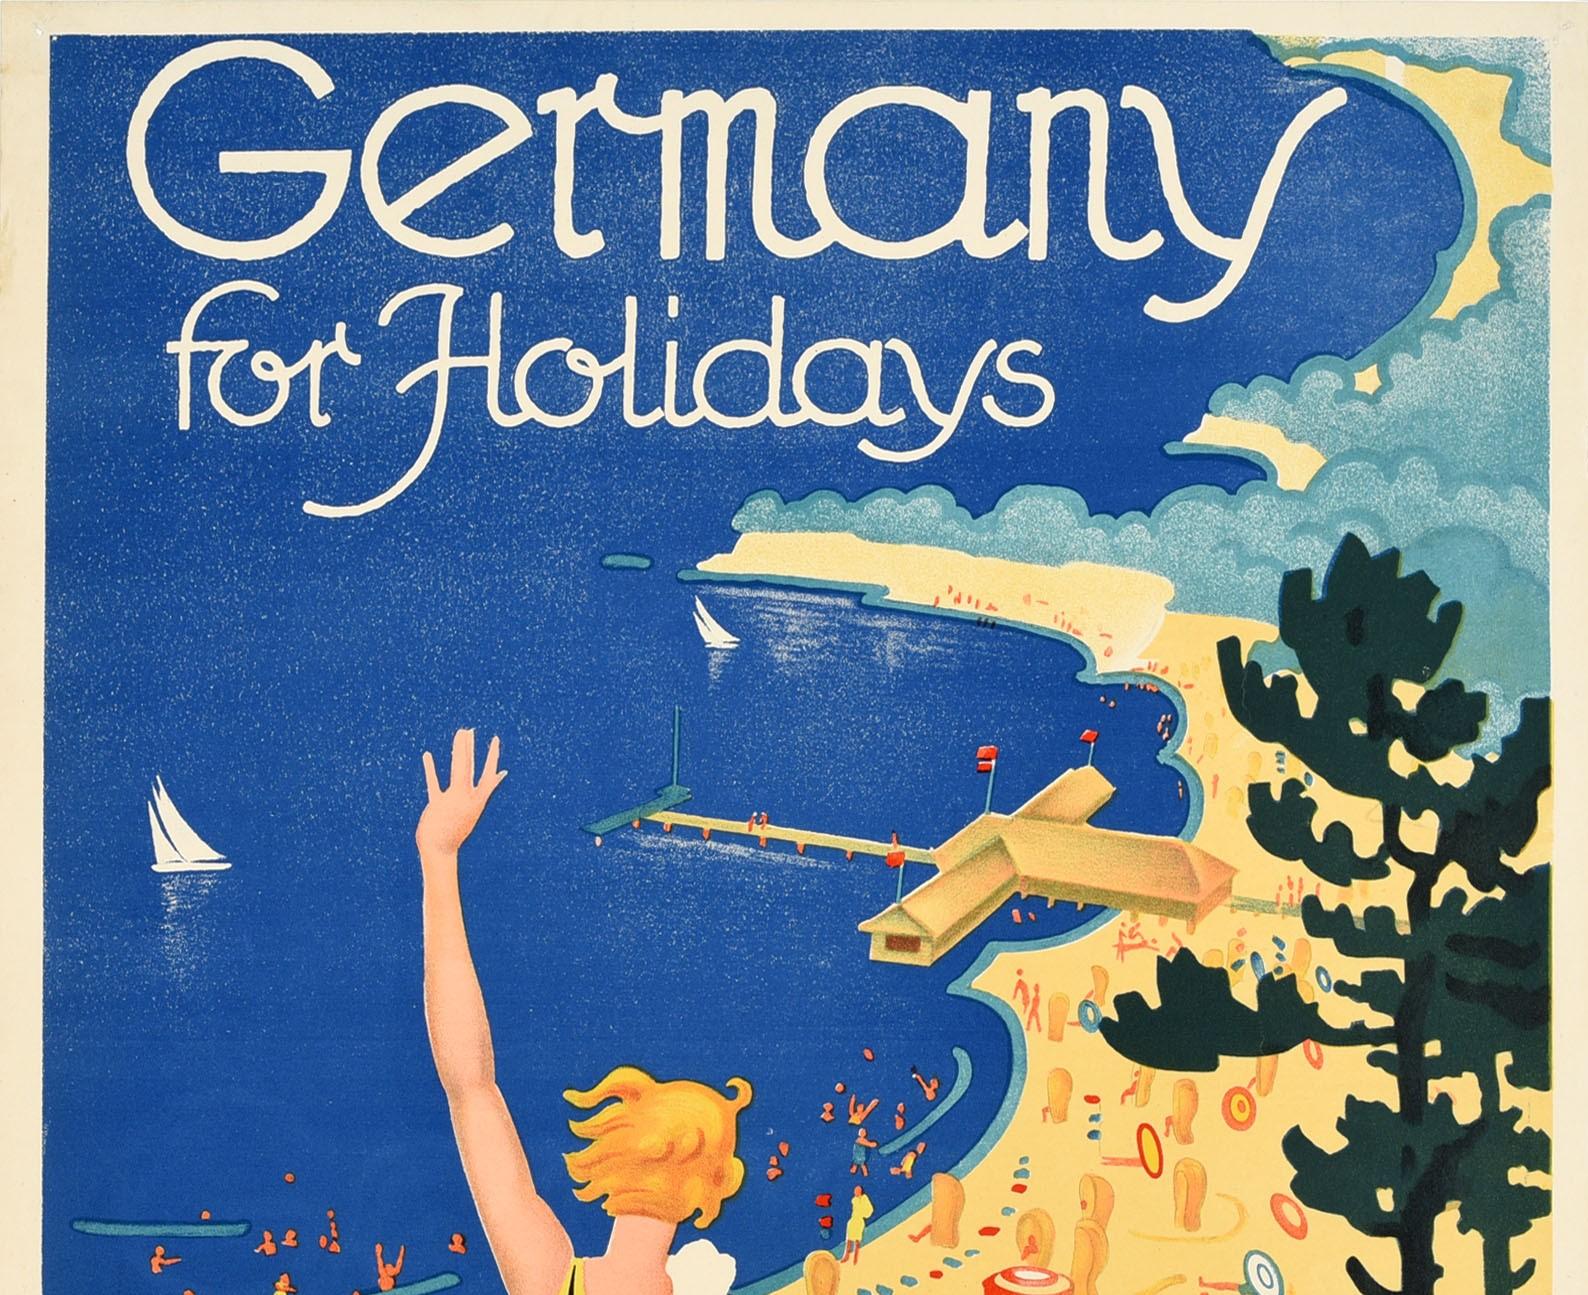 Original vintage summer travel poster - Germany for Holidays - featuring a stunning Art Deco design showing a person waving in the foreground next to a red and white striped sun umbrella below trees with people playing, relaxing and sunbathing at